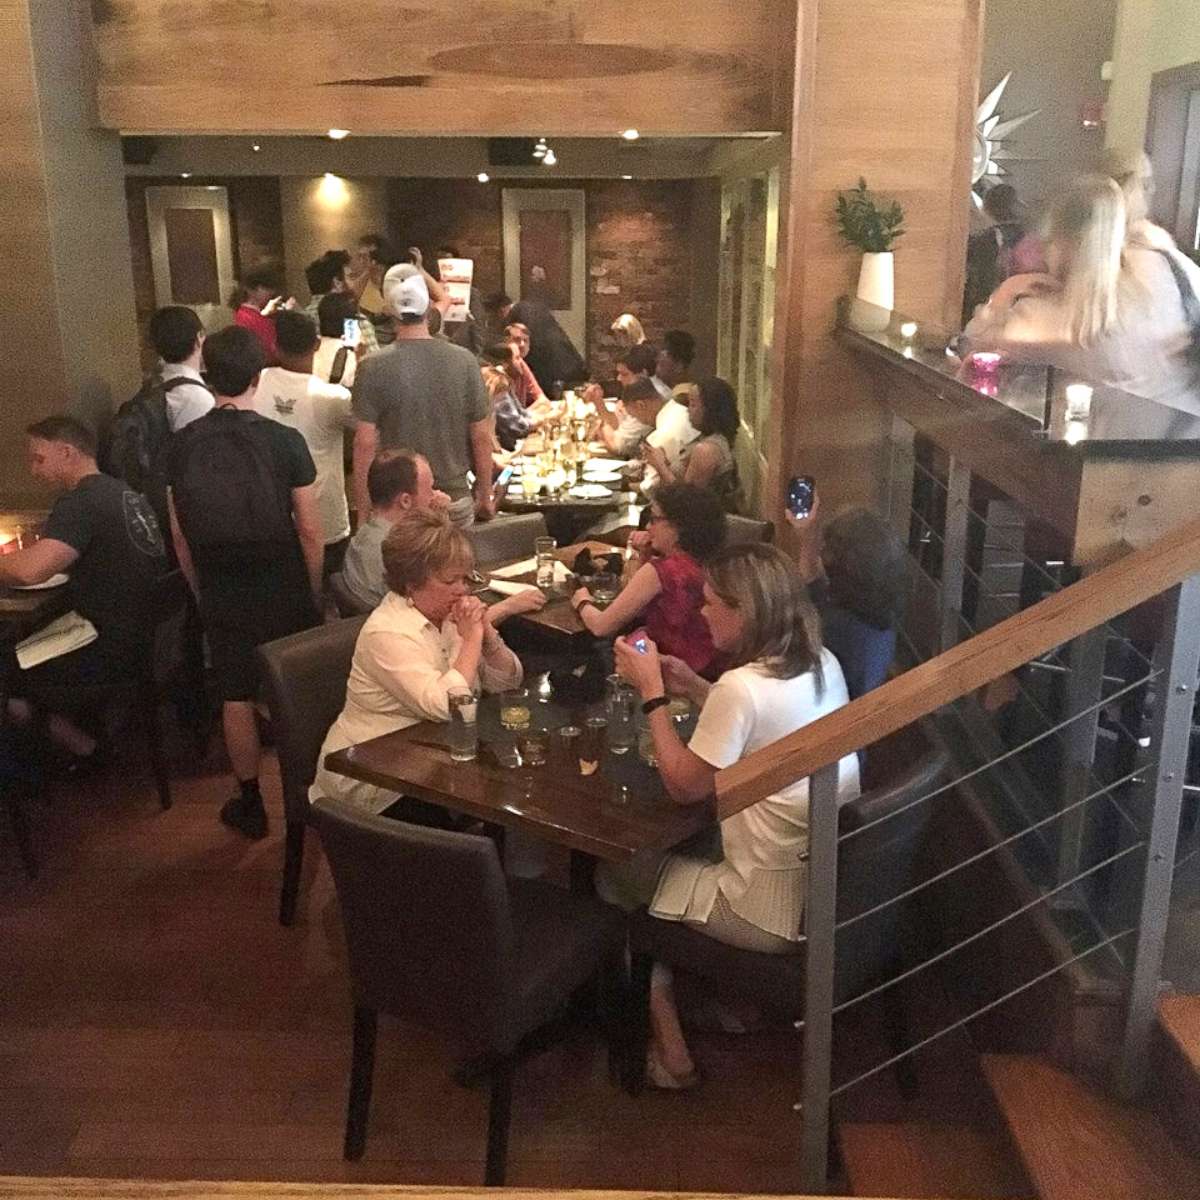 PHOTO: In this photo obtained from social media, activists chant slogans as they interrupt U.S. Homeland Security Secretary Kirstjen Nielsen's (top R) dinner at a restaurant in Washington, D.C., June 19, 2018.